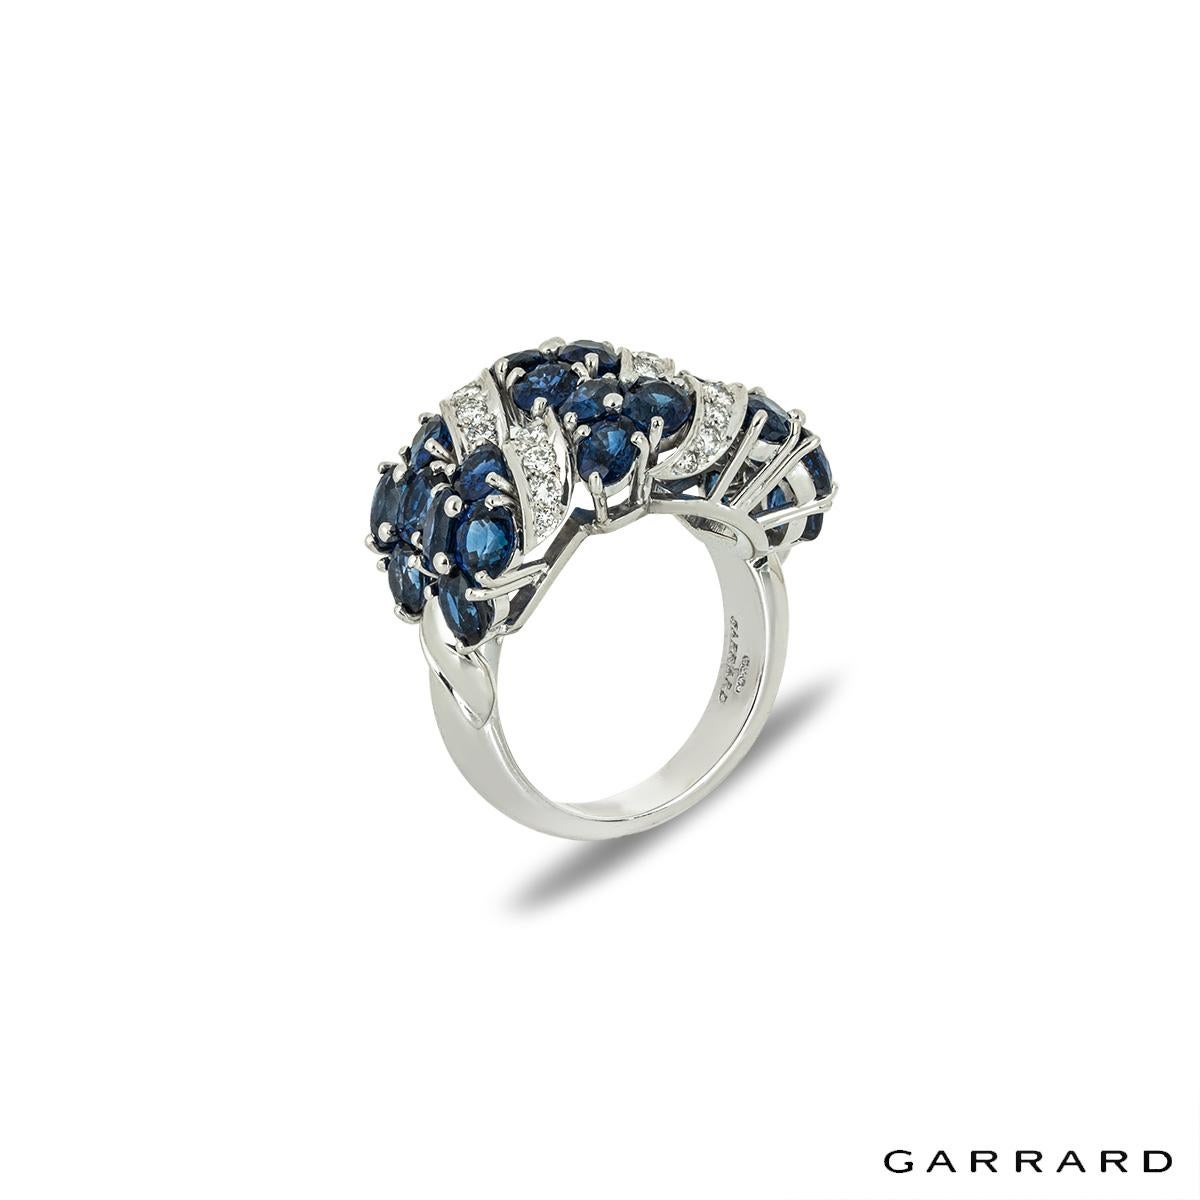 An intricate 18k white gold sapphire and diamond ring by Garrard. The two-row ring alternates between sapphires and diamonds. The 24 oval cut sapphires have an approximate total weight of 5.52ct and display a rich blue hue. Pave set between the